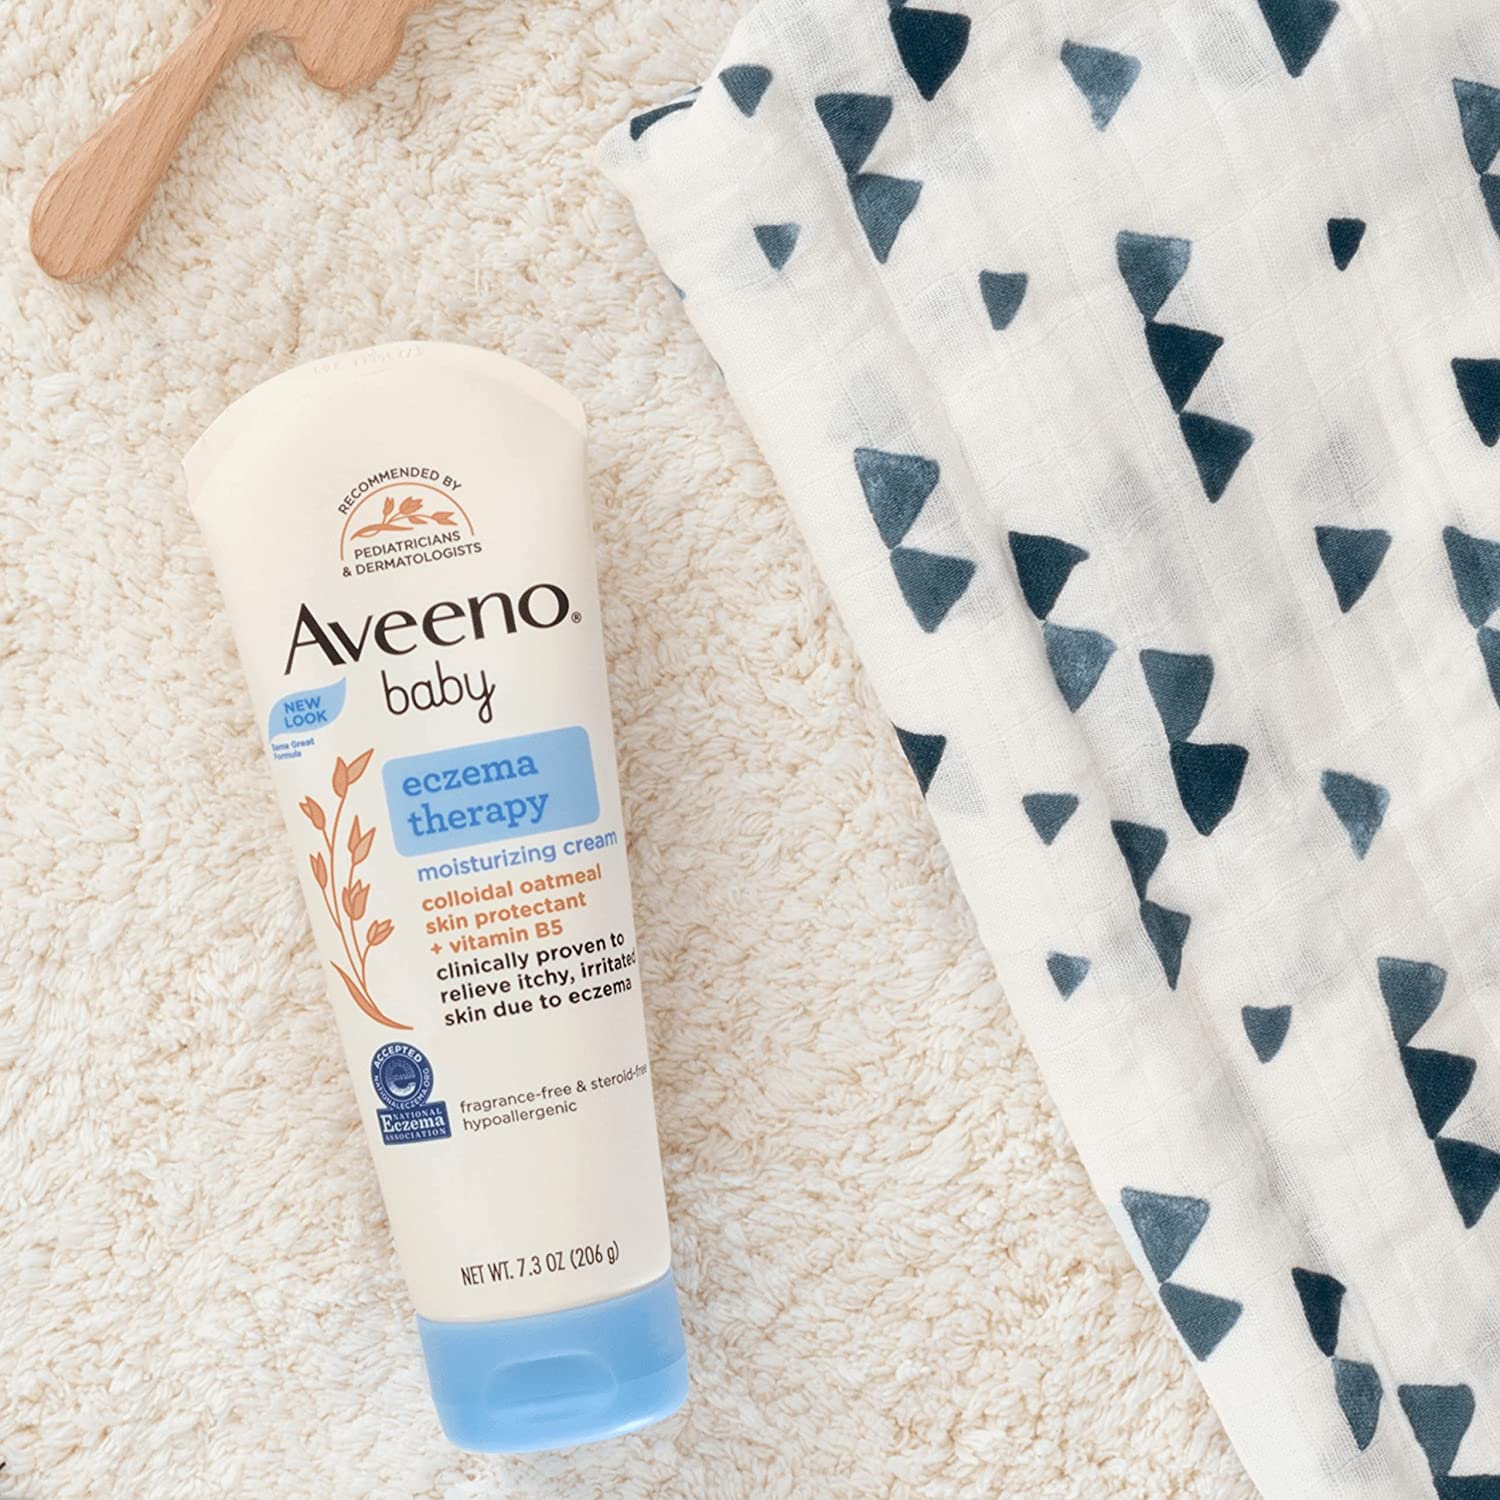 Aveeno Baby Eczema Therapy Moisturizing Cream, Natural Colloidal Oatmeal & Vitamin B5, Baby Eczema Cream for Dry, Itchy, Irritated Skin Due to Eczema, Paraben- & Steroid-Free, 5 fl. oz - 38137101845